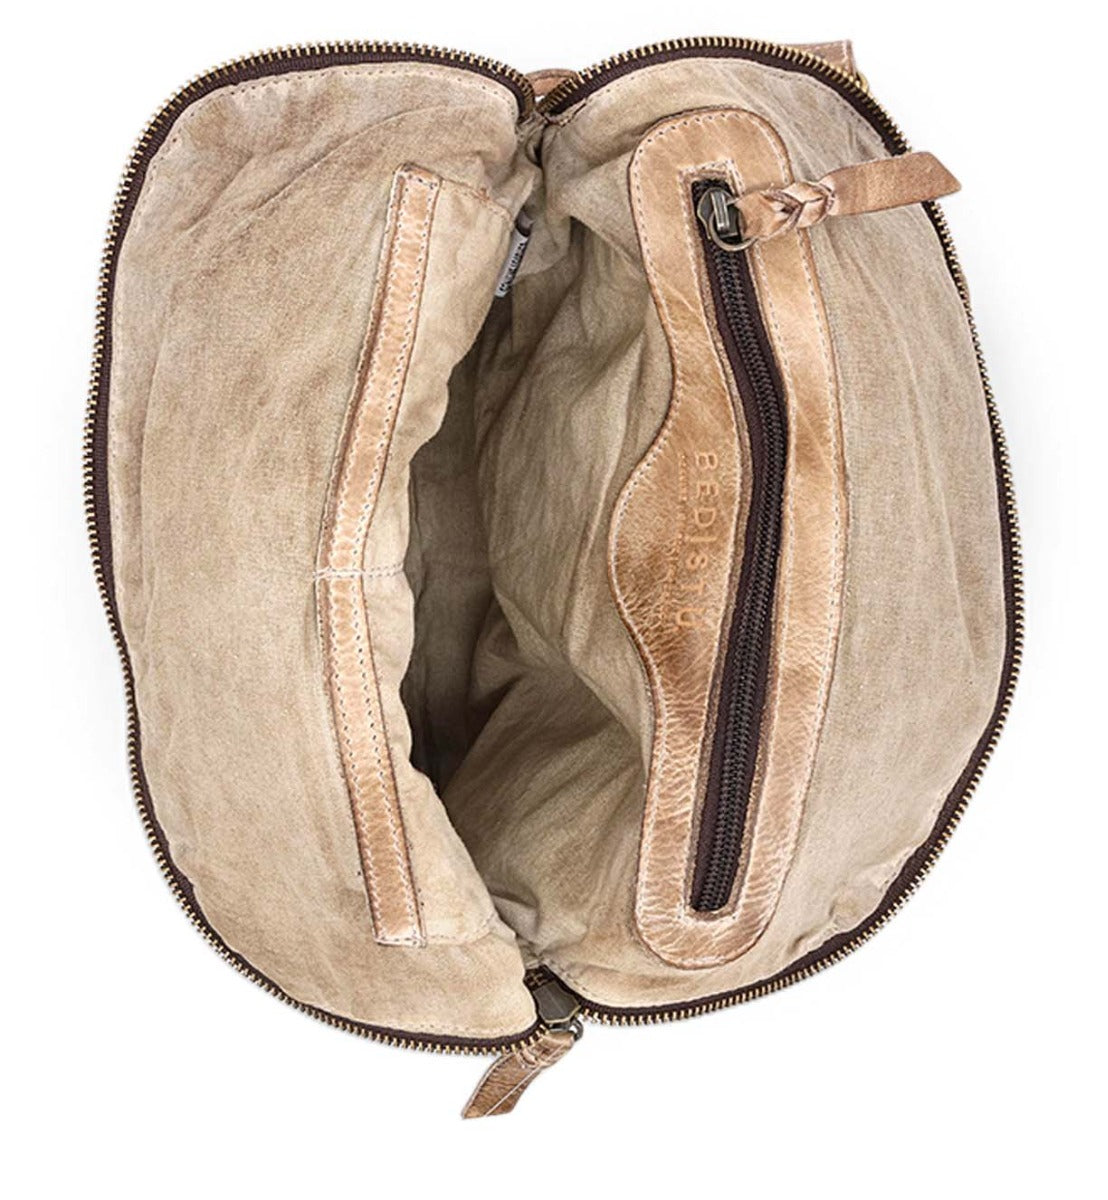 The inside of a Bed Stu tan bag with zippers.